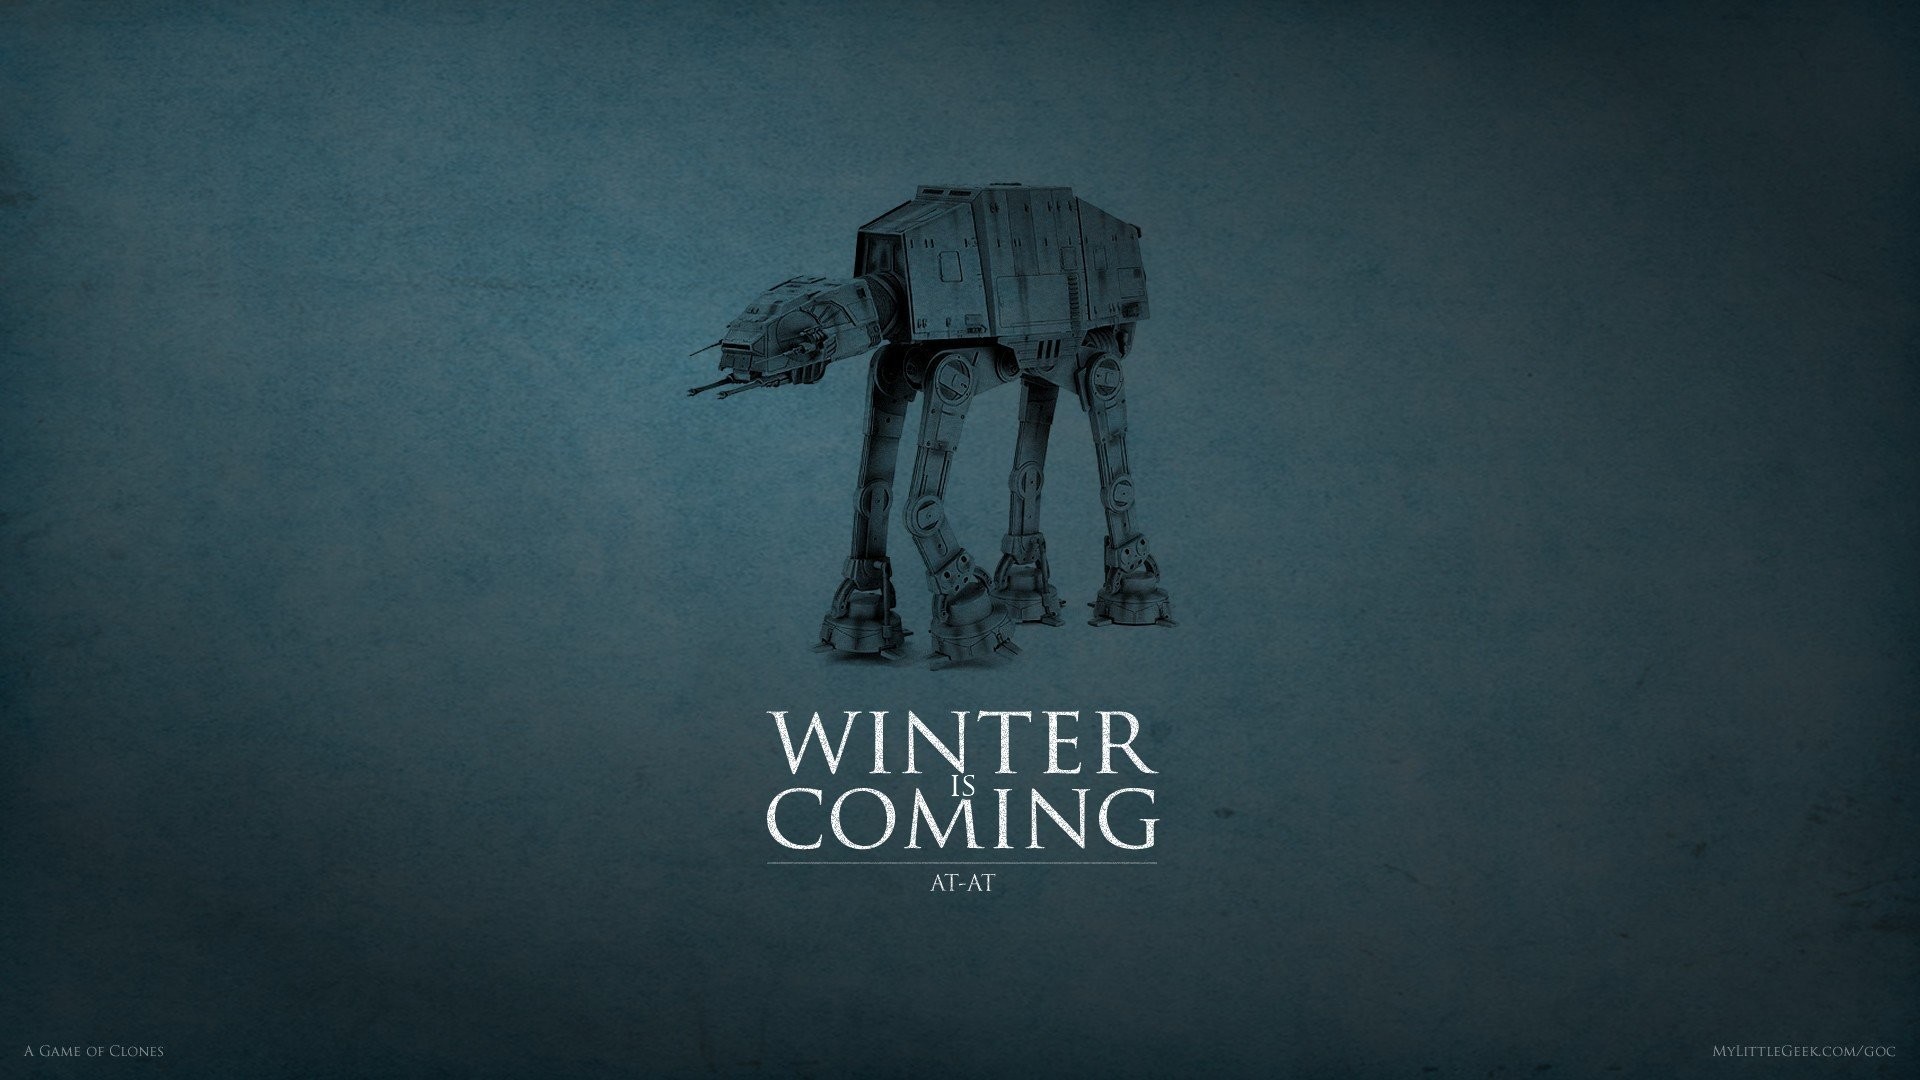 1920x1080 Game Of Thrones House Stark Star Wars AT-AT House Stark Wallpaper ...